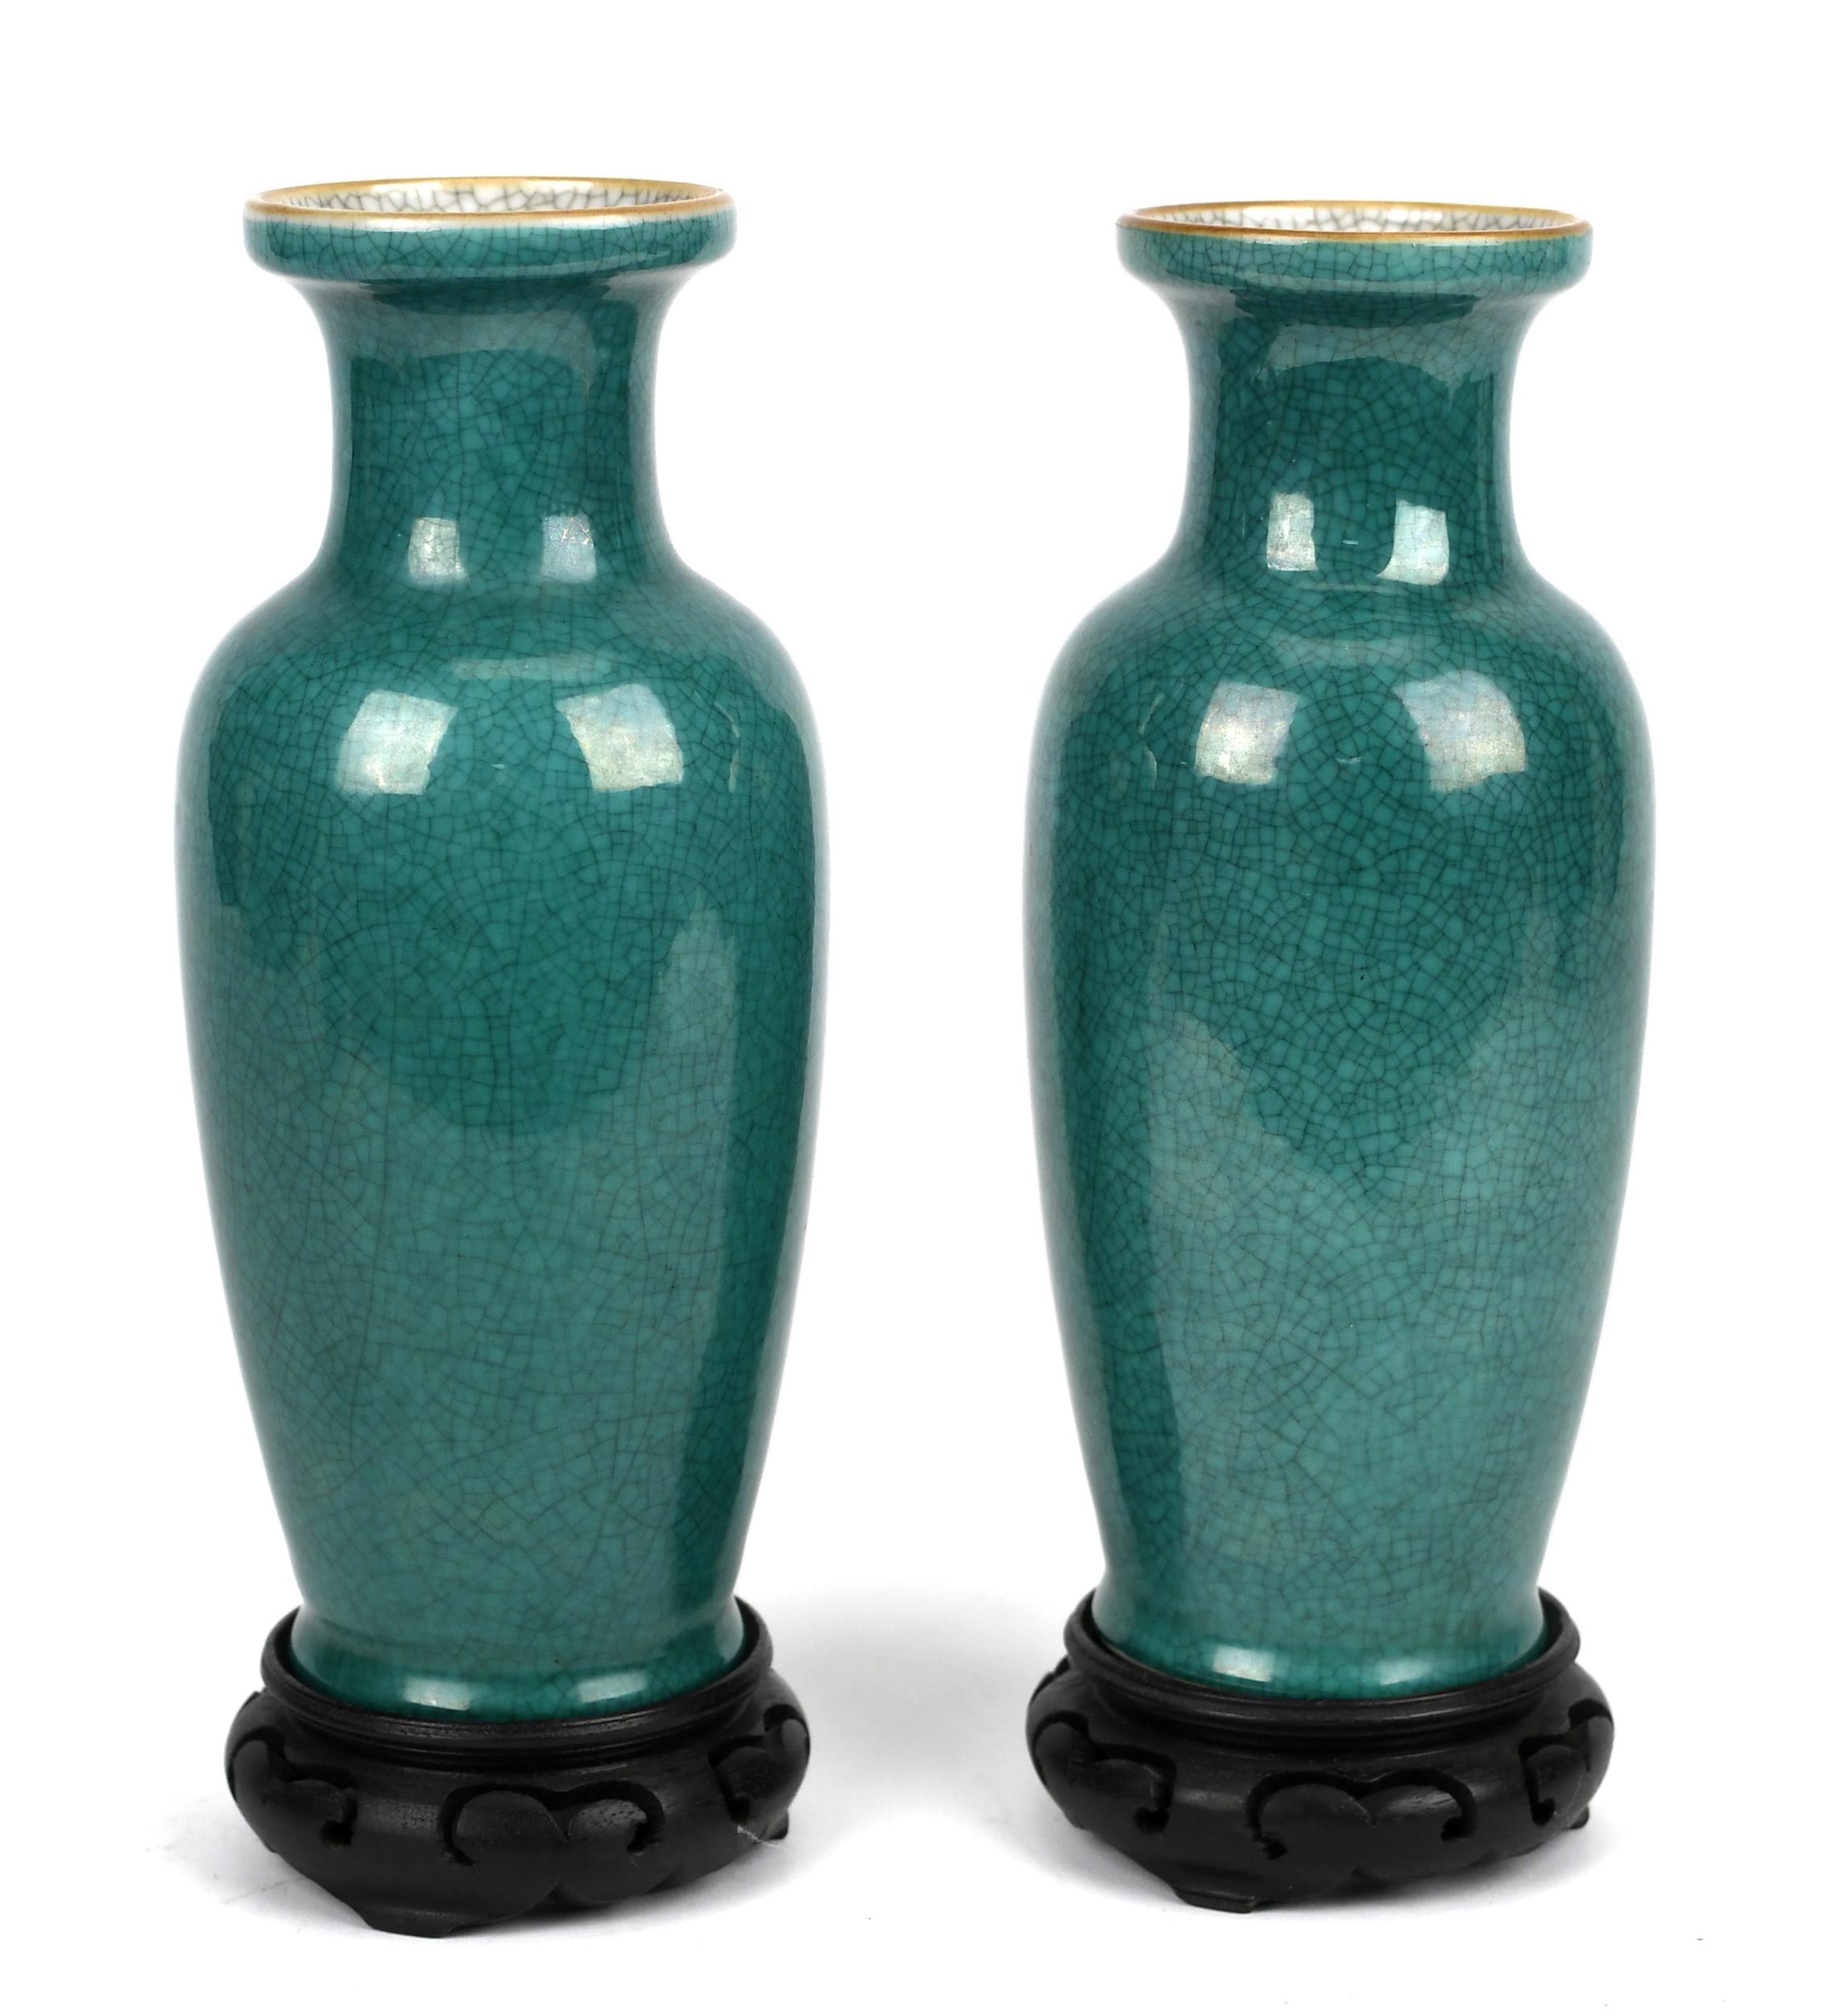 PAIR OF CHINESE GREEN MONOCHROME